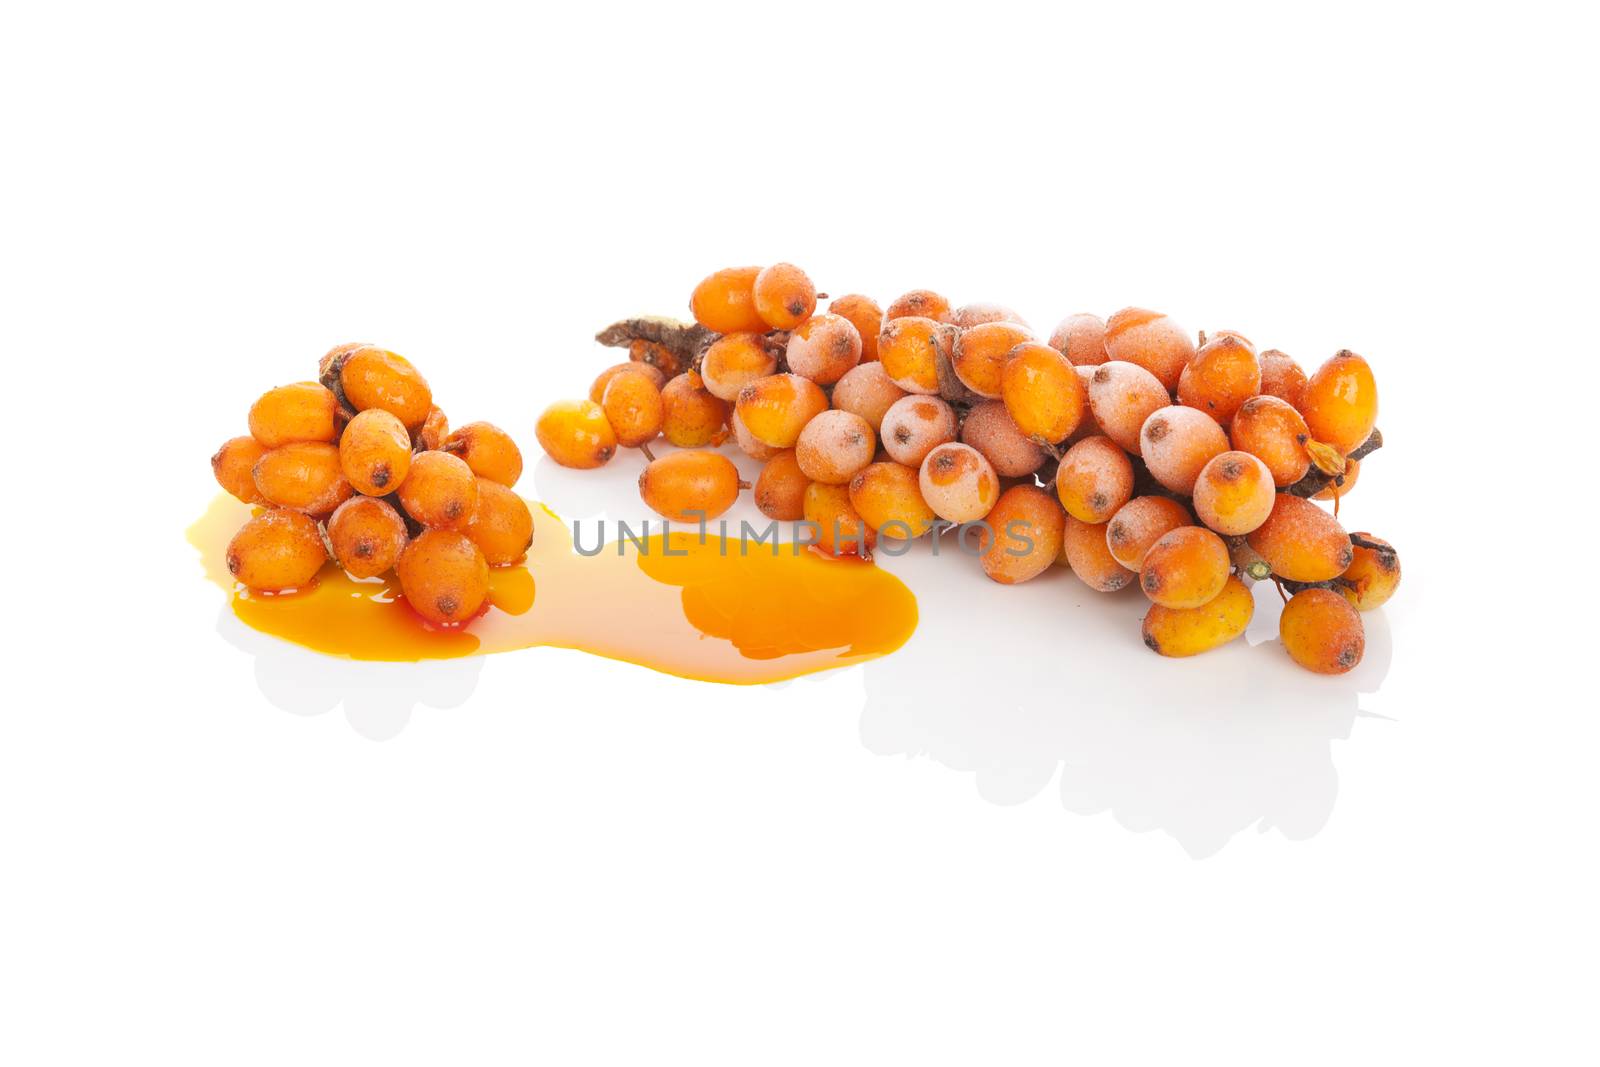 Sea buckthorn berries and sea buckthorn oil isolated on white background. Healthy fruit eating, natural detox.